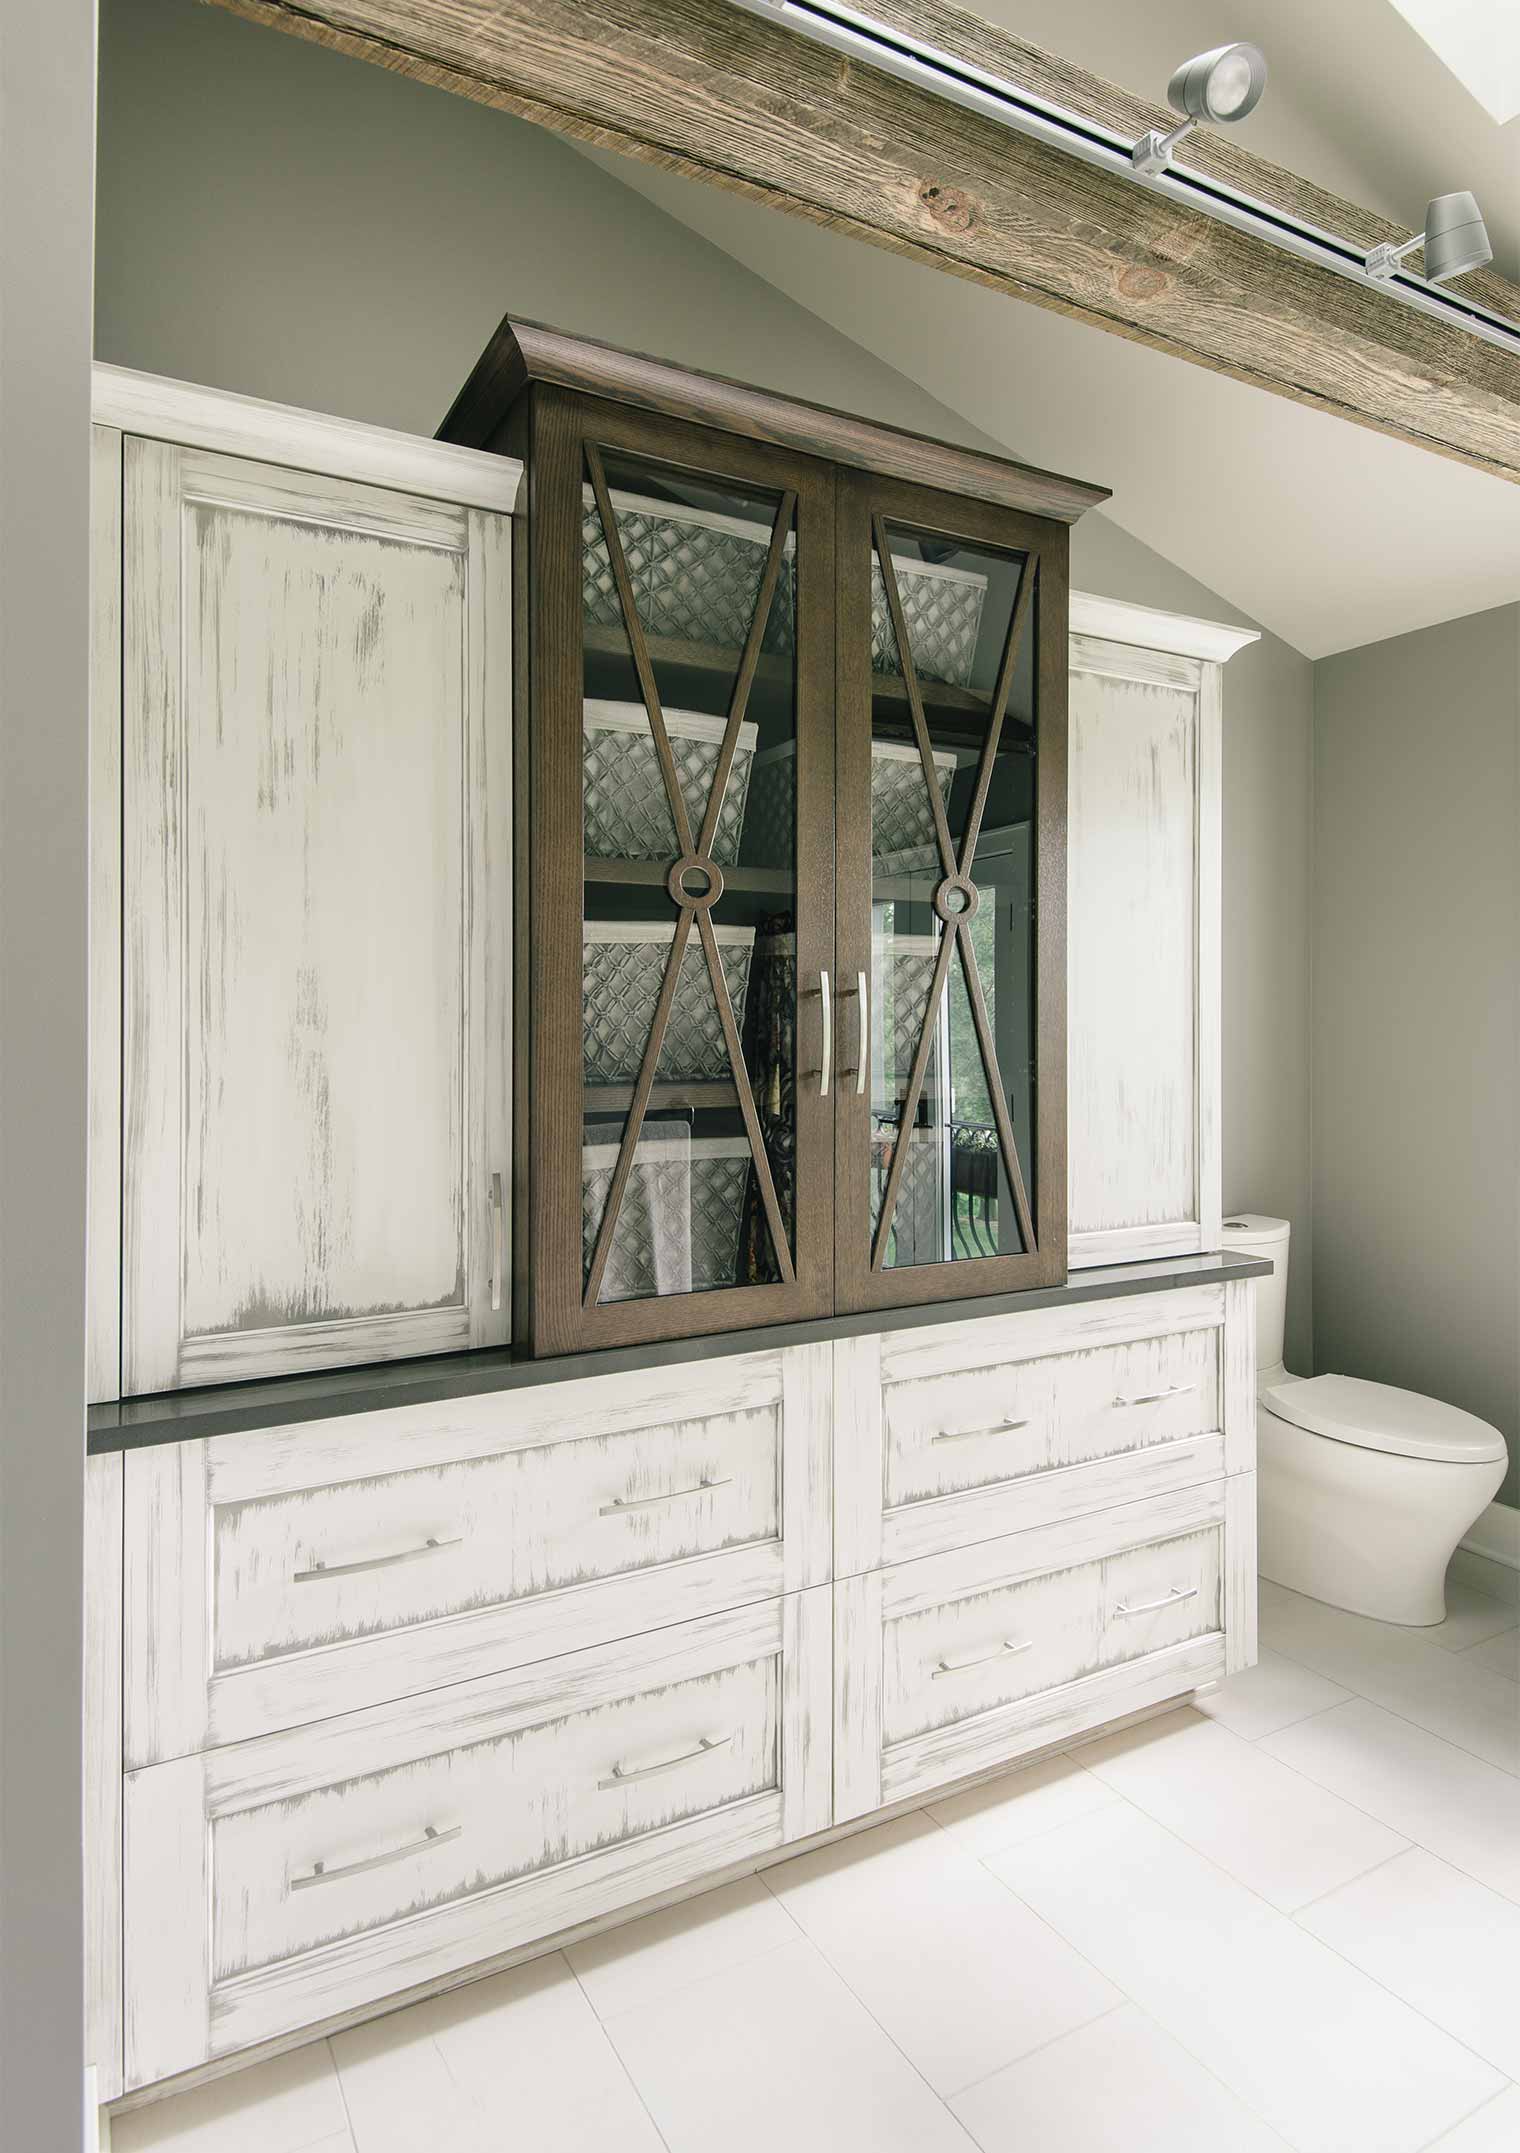 custom linen cabinet with white wash glaze and metal accents in contemporary bathroom by designer and remodeler Silent Rivers of Des Moines, Iowa